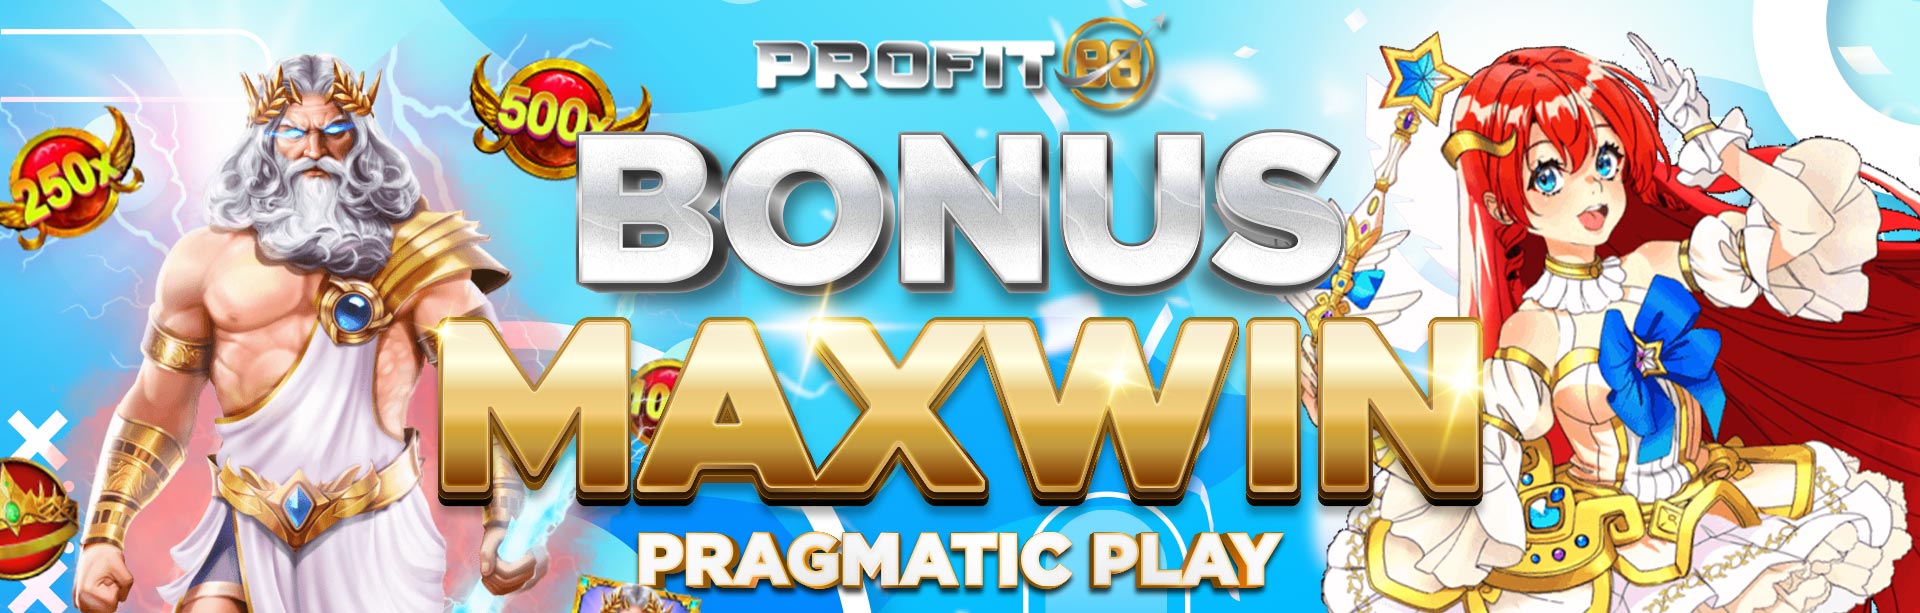 PROFIT88 Experience Excellence with Pragmatic Play: Setting the Standard for Unmatched Quality and Fun